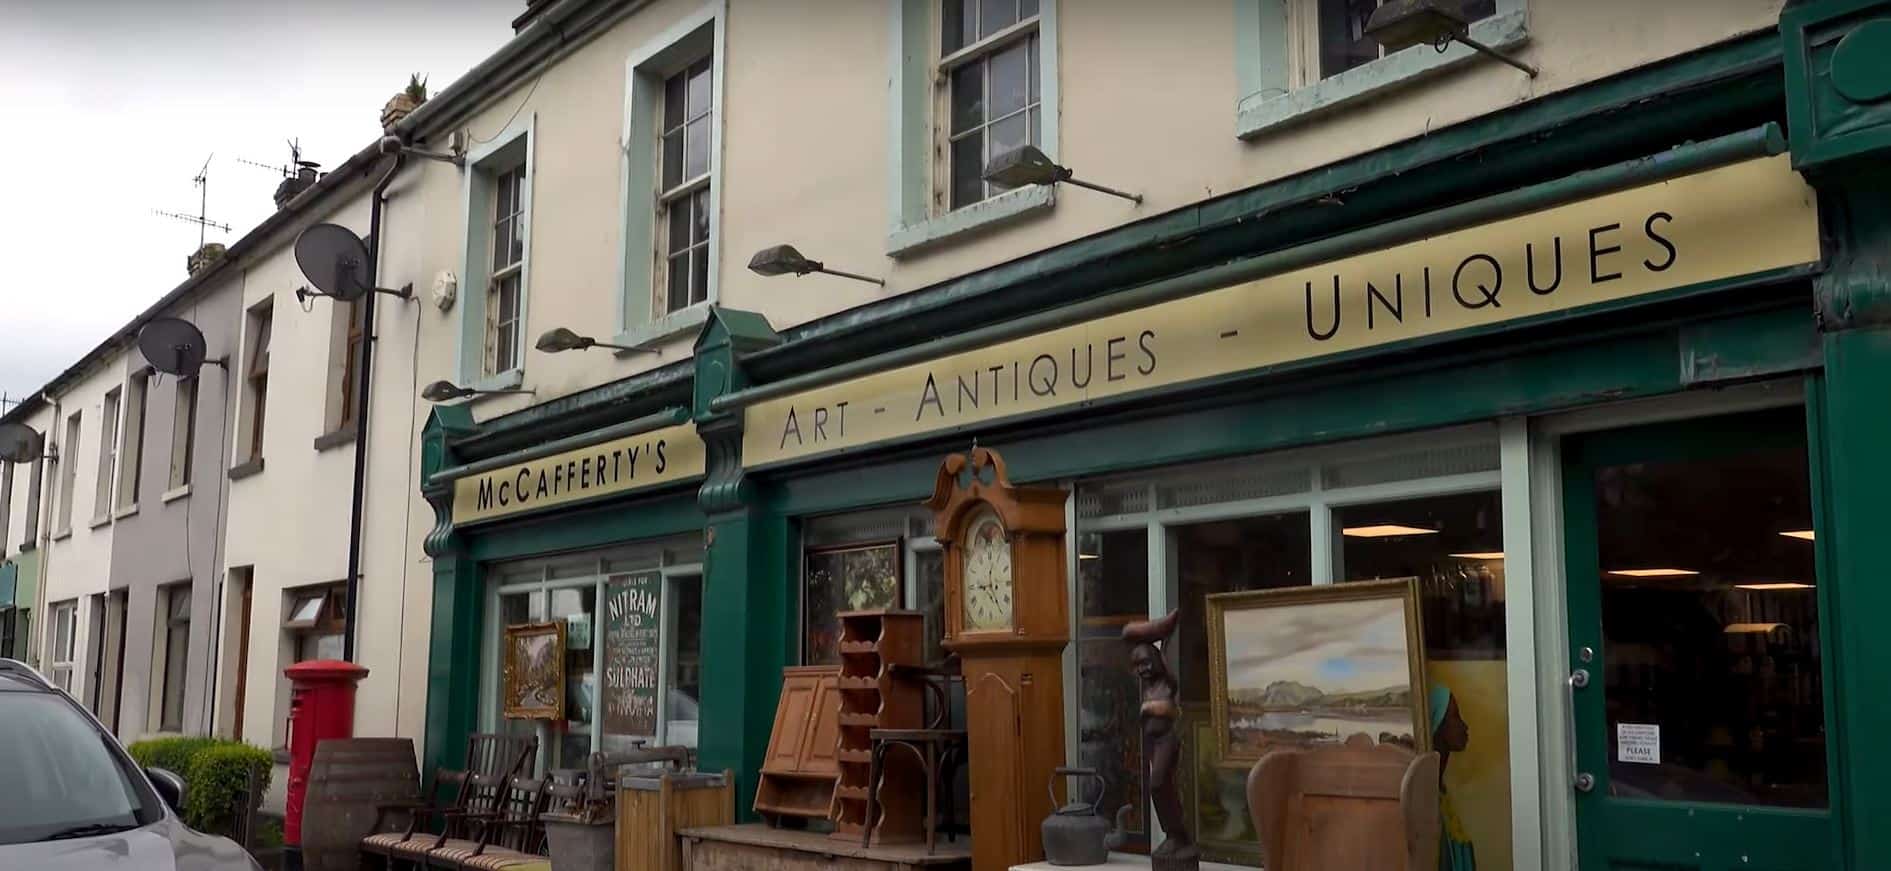 McCafferty's Art, Antiques & Uniques | Sion Mills, Northern Ireland